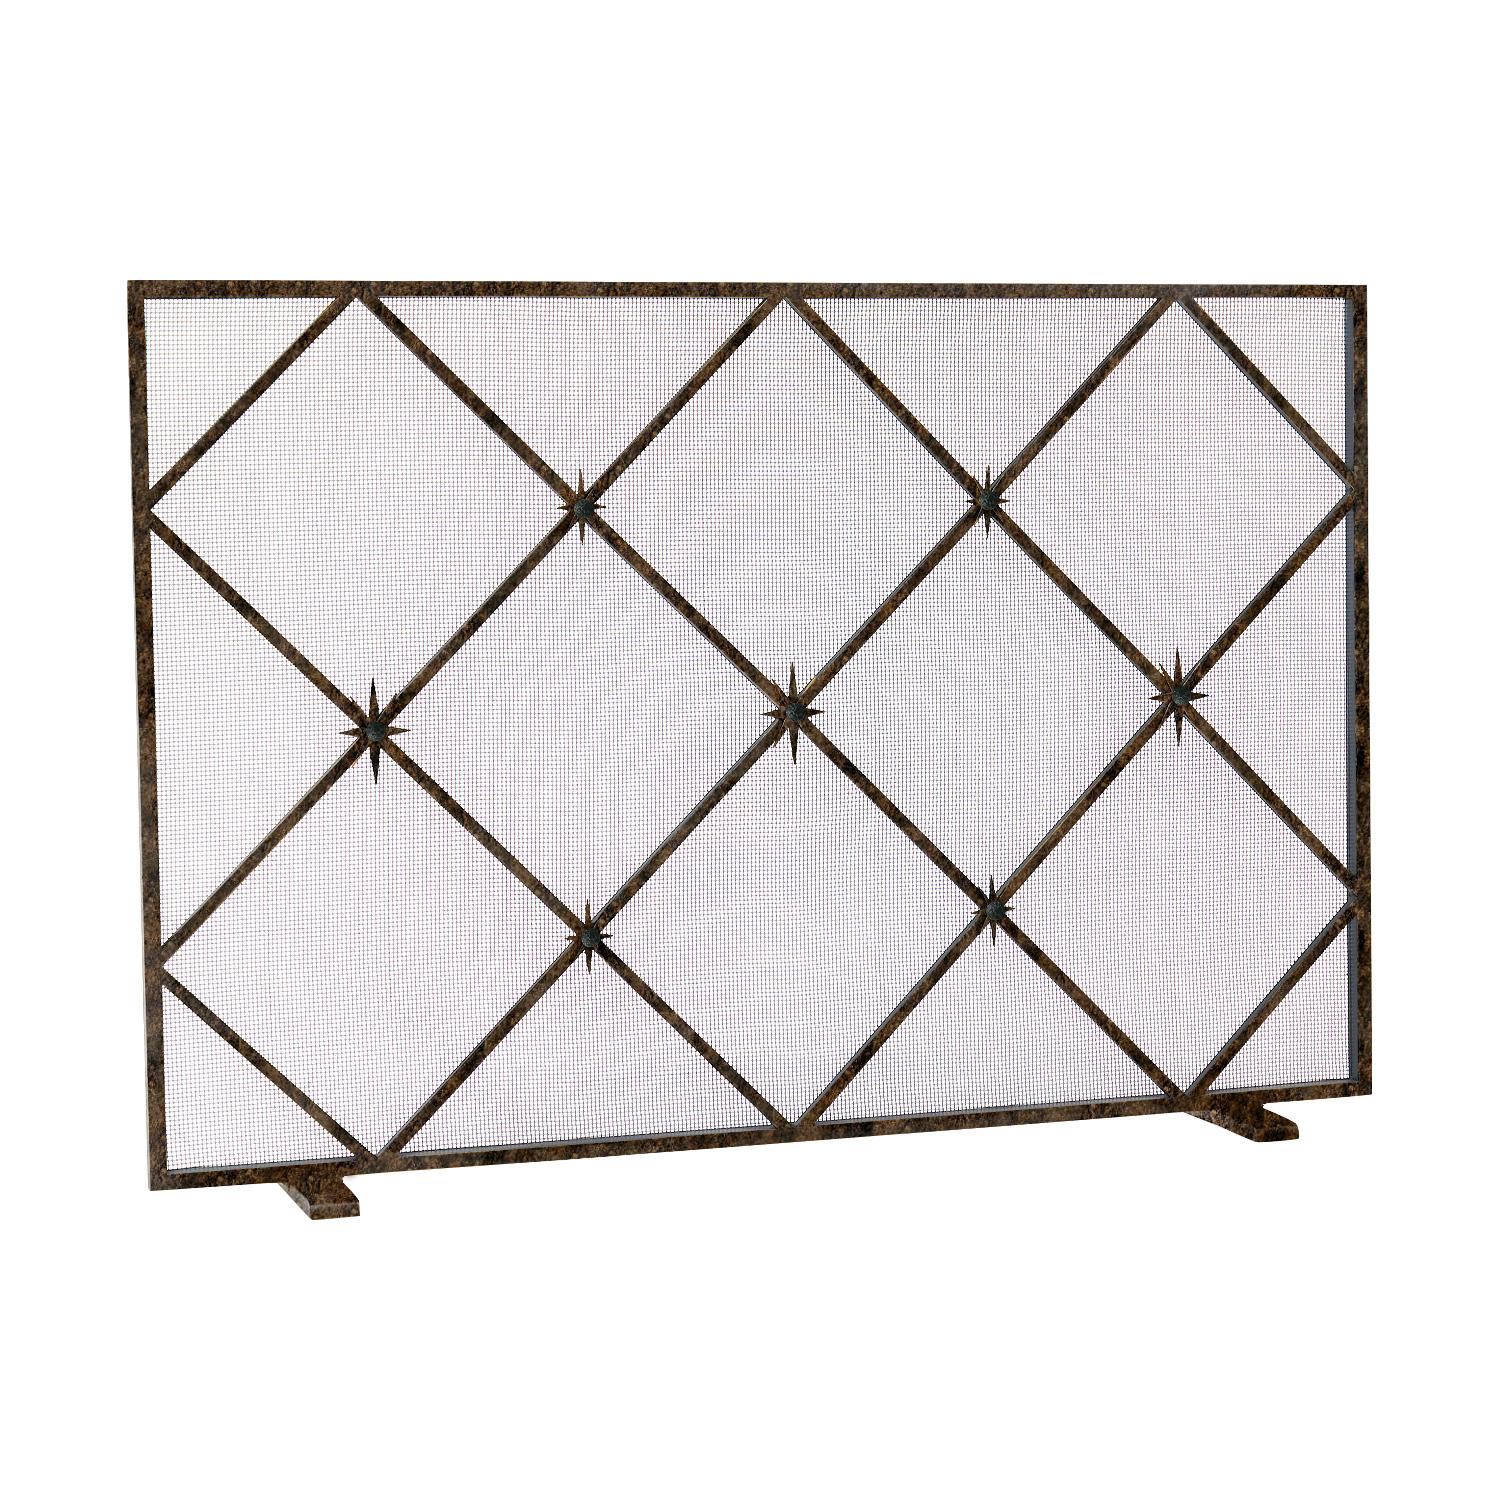 The Celeste Fireplace Screen's hand-forged star points and colorful, textural ceramic spheres evoke the beauty of a clear night sky. The solid iron frame, crossbar motif, and cheerful decorative elements are skillfully built by American artisans.